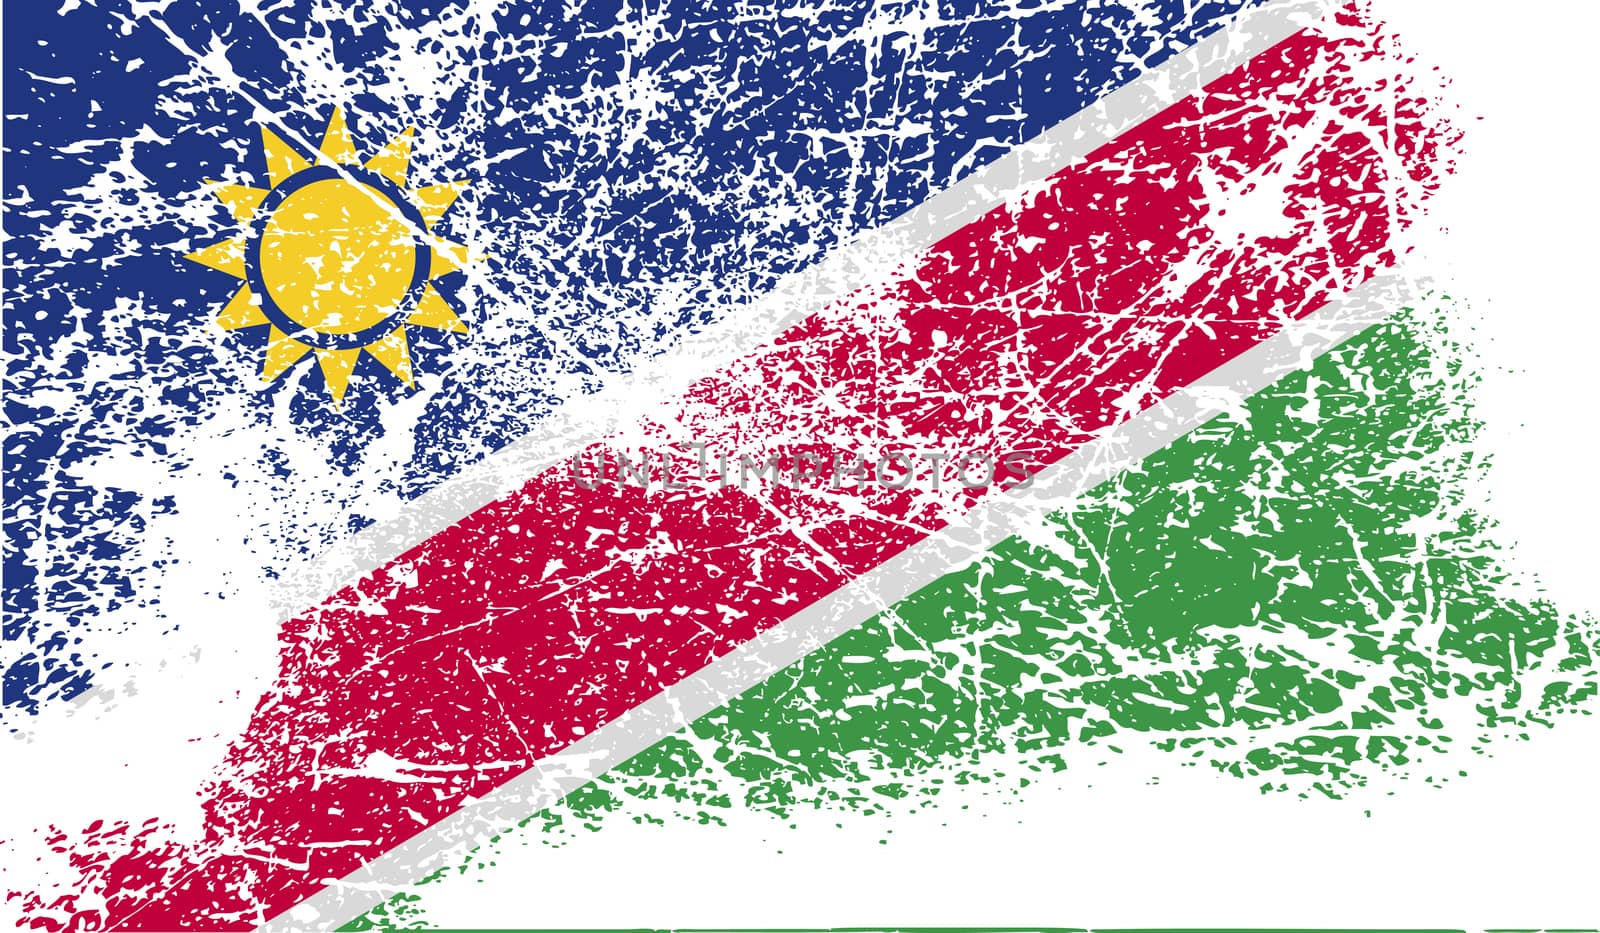 Flag of Namibia with old texture.  illustration